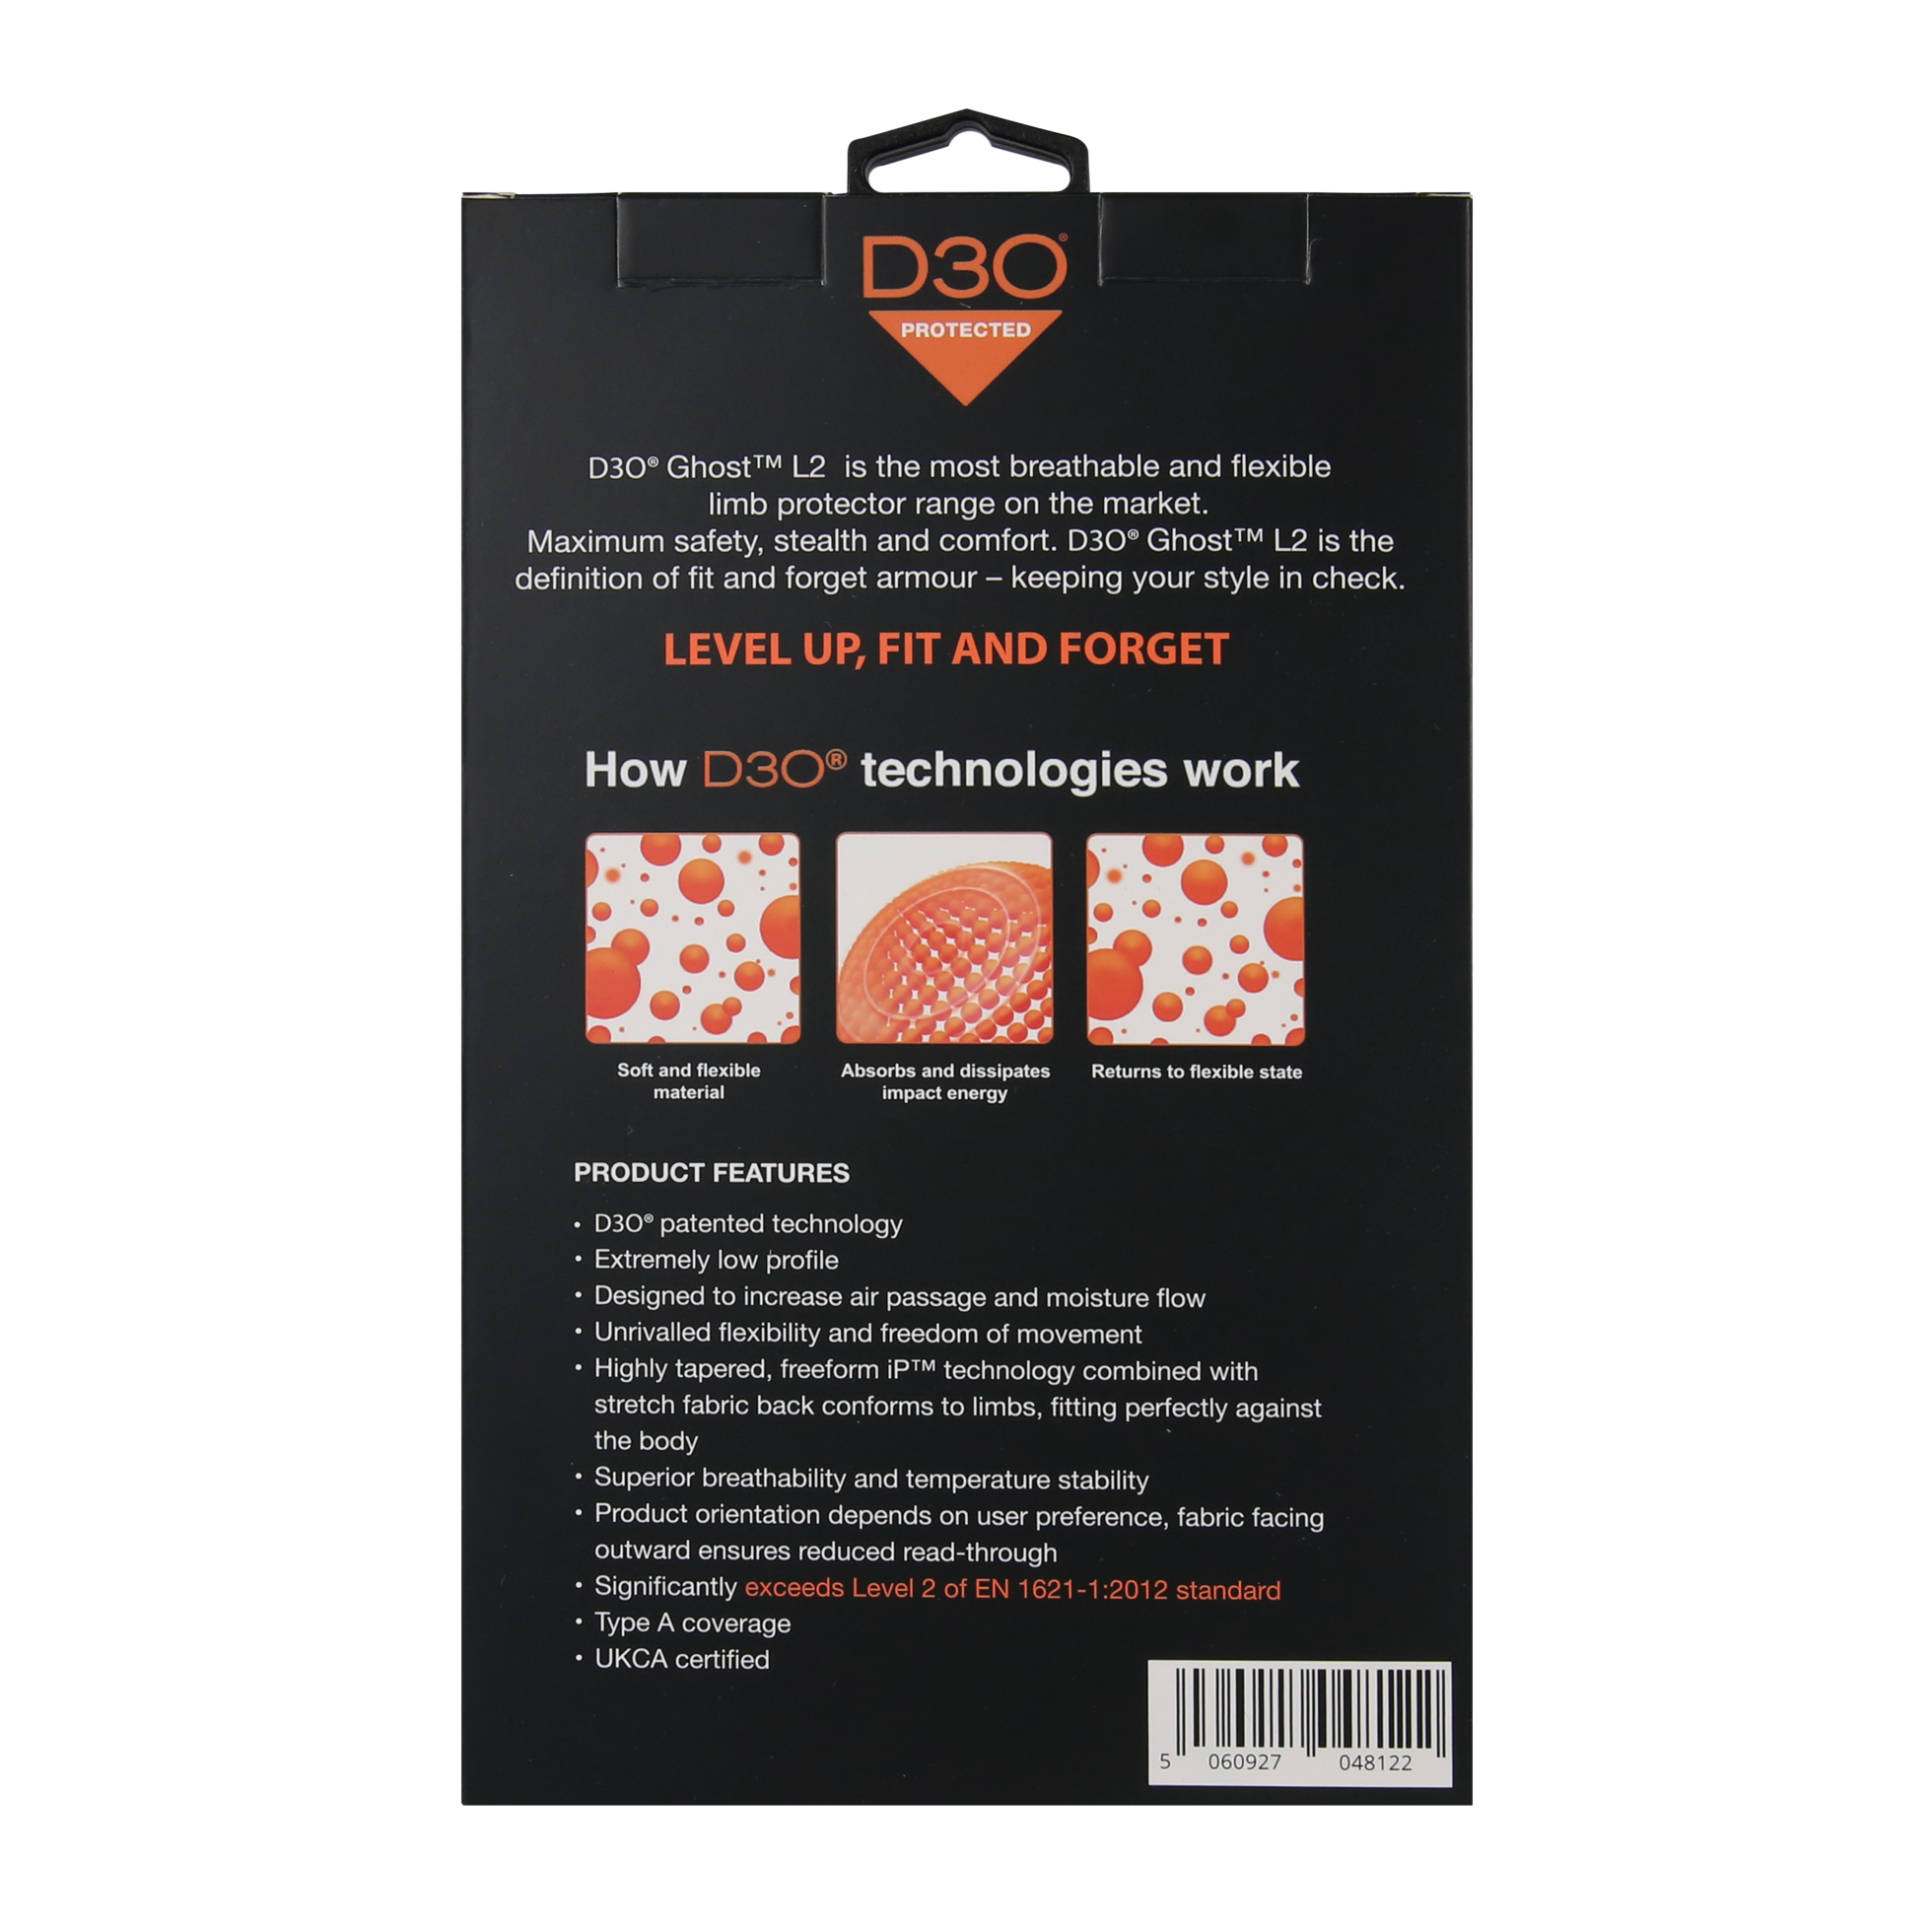  A pack of orange D30 ghost LEVEL 2 knee and elbow protectors from MotoGirl